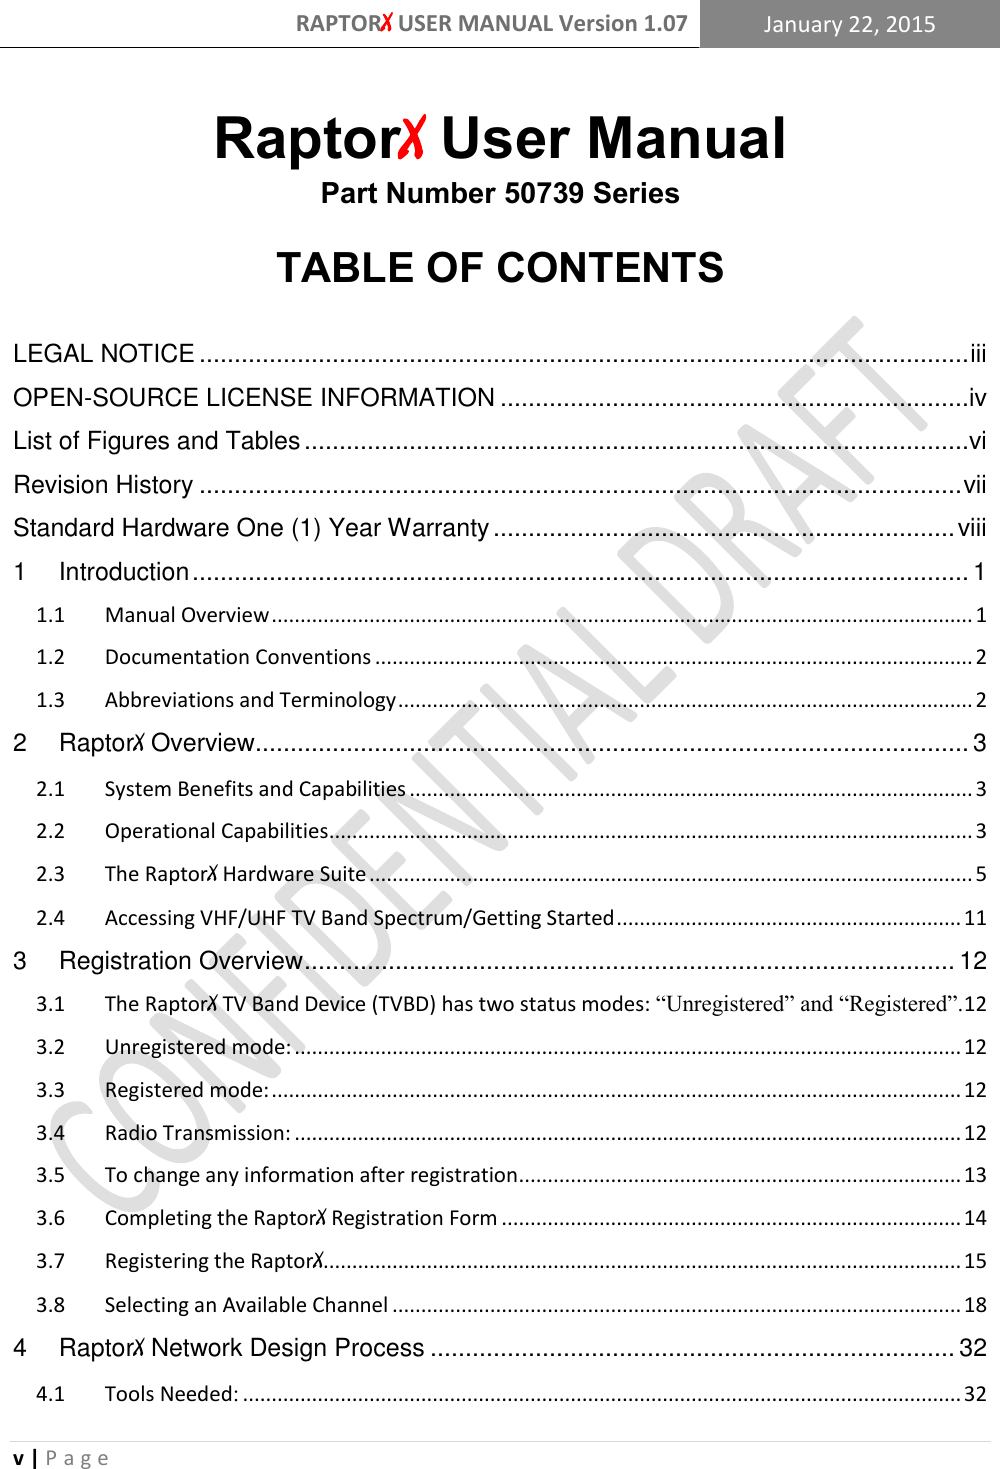 RAPTORX USER MANUAL Version 1.07 January 22, 2015  v | P a g e   RaptorX User Manual Part Number 50739 Series  TABLE OF CONTENTS  LEGAL NOTICE .............................................................................................................. iii OPEN-SOURCE LICENSE INFORMATION ...................................................................iv List of Figures and Tables ...............................................................................................vi Revision History ............................................................................................................. vii Standard Hardware One (1) Year Warranty .................................................................. viii 1 Introduction ............................................................................................................... 1 1.1  Manual Overview .......................................................................................................................... 1 1.2  Documentation Conventions ........................................................................................................ 2 1.3  Abbreviations and Terminology .................................................................................................... 2 2 RaptorX Overview...................................................................................................... 3 2.1  System Benefits and Capabilities .................................................................................................. 3 2.2  Operational Capabilities ................................................................................................................ 3 2.3  The RaptorX Hardware Suite ......................................................................................................... 5 2.4  Accessing VHF/UHF TV Band Spectrum/Getting Started ............................................................ 11 3 Registration Overview ............................................................................................. 12 3.1  The RaptorX TV Band Device (TVBD) has two status modes: “Unregistered” and “Registered”. 12 3.2  Unregistered mode: .................................................................................................................... 12 3.3  Registered mode: ........................................................................................................................ 12 3.4  Radio Transmission: .................................................................................................................... 12 3.5  To change any information after registration ............................................................................. 13 3.6  Completing the RaptorX Registration Form ................................................................................ 14 3.7  Registering the RaptorX ............................................................................................................... 15 3.8  Selecting an Available Channel ................................................................................................... 18 4 RaptorX Network Design Process ........................................................................... 32 4.1  Tools Needed: ............................................................................................................................. 32 